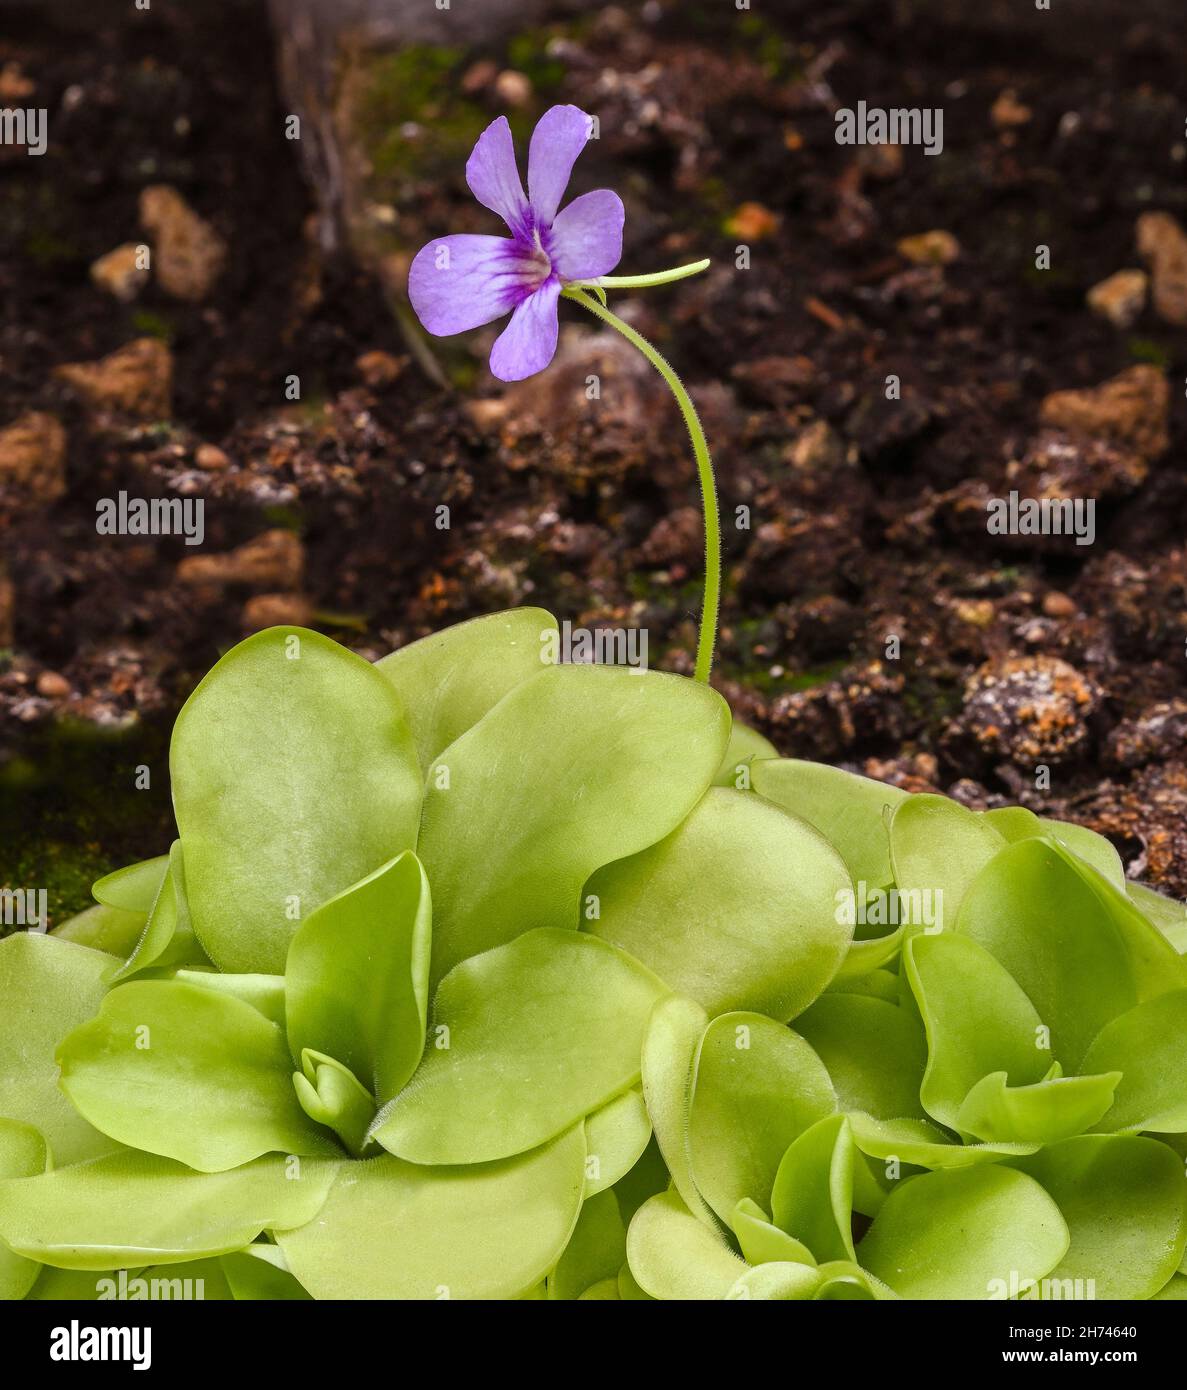 Blossom and leaves of a mexican butterwort (Pinguecula esseriana). Botanical Garden, KIT Karlsruhe, Germany, Europe Stock Photo